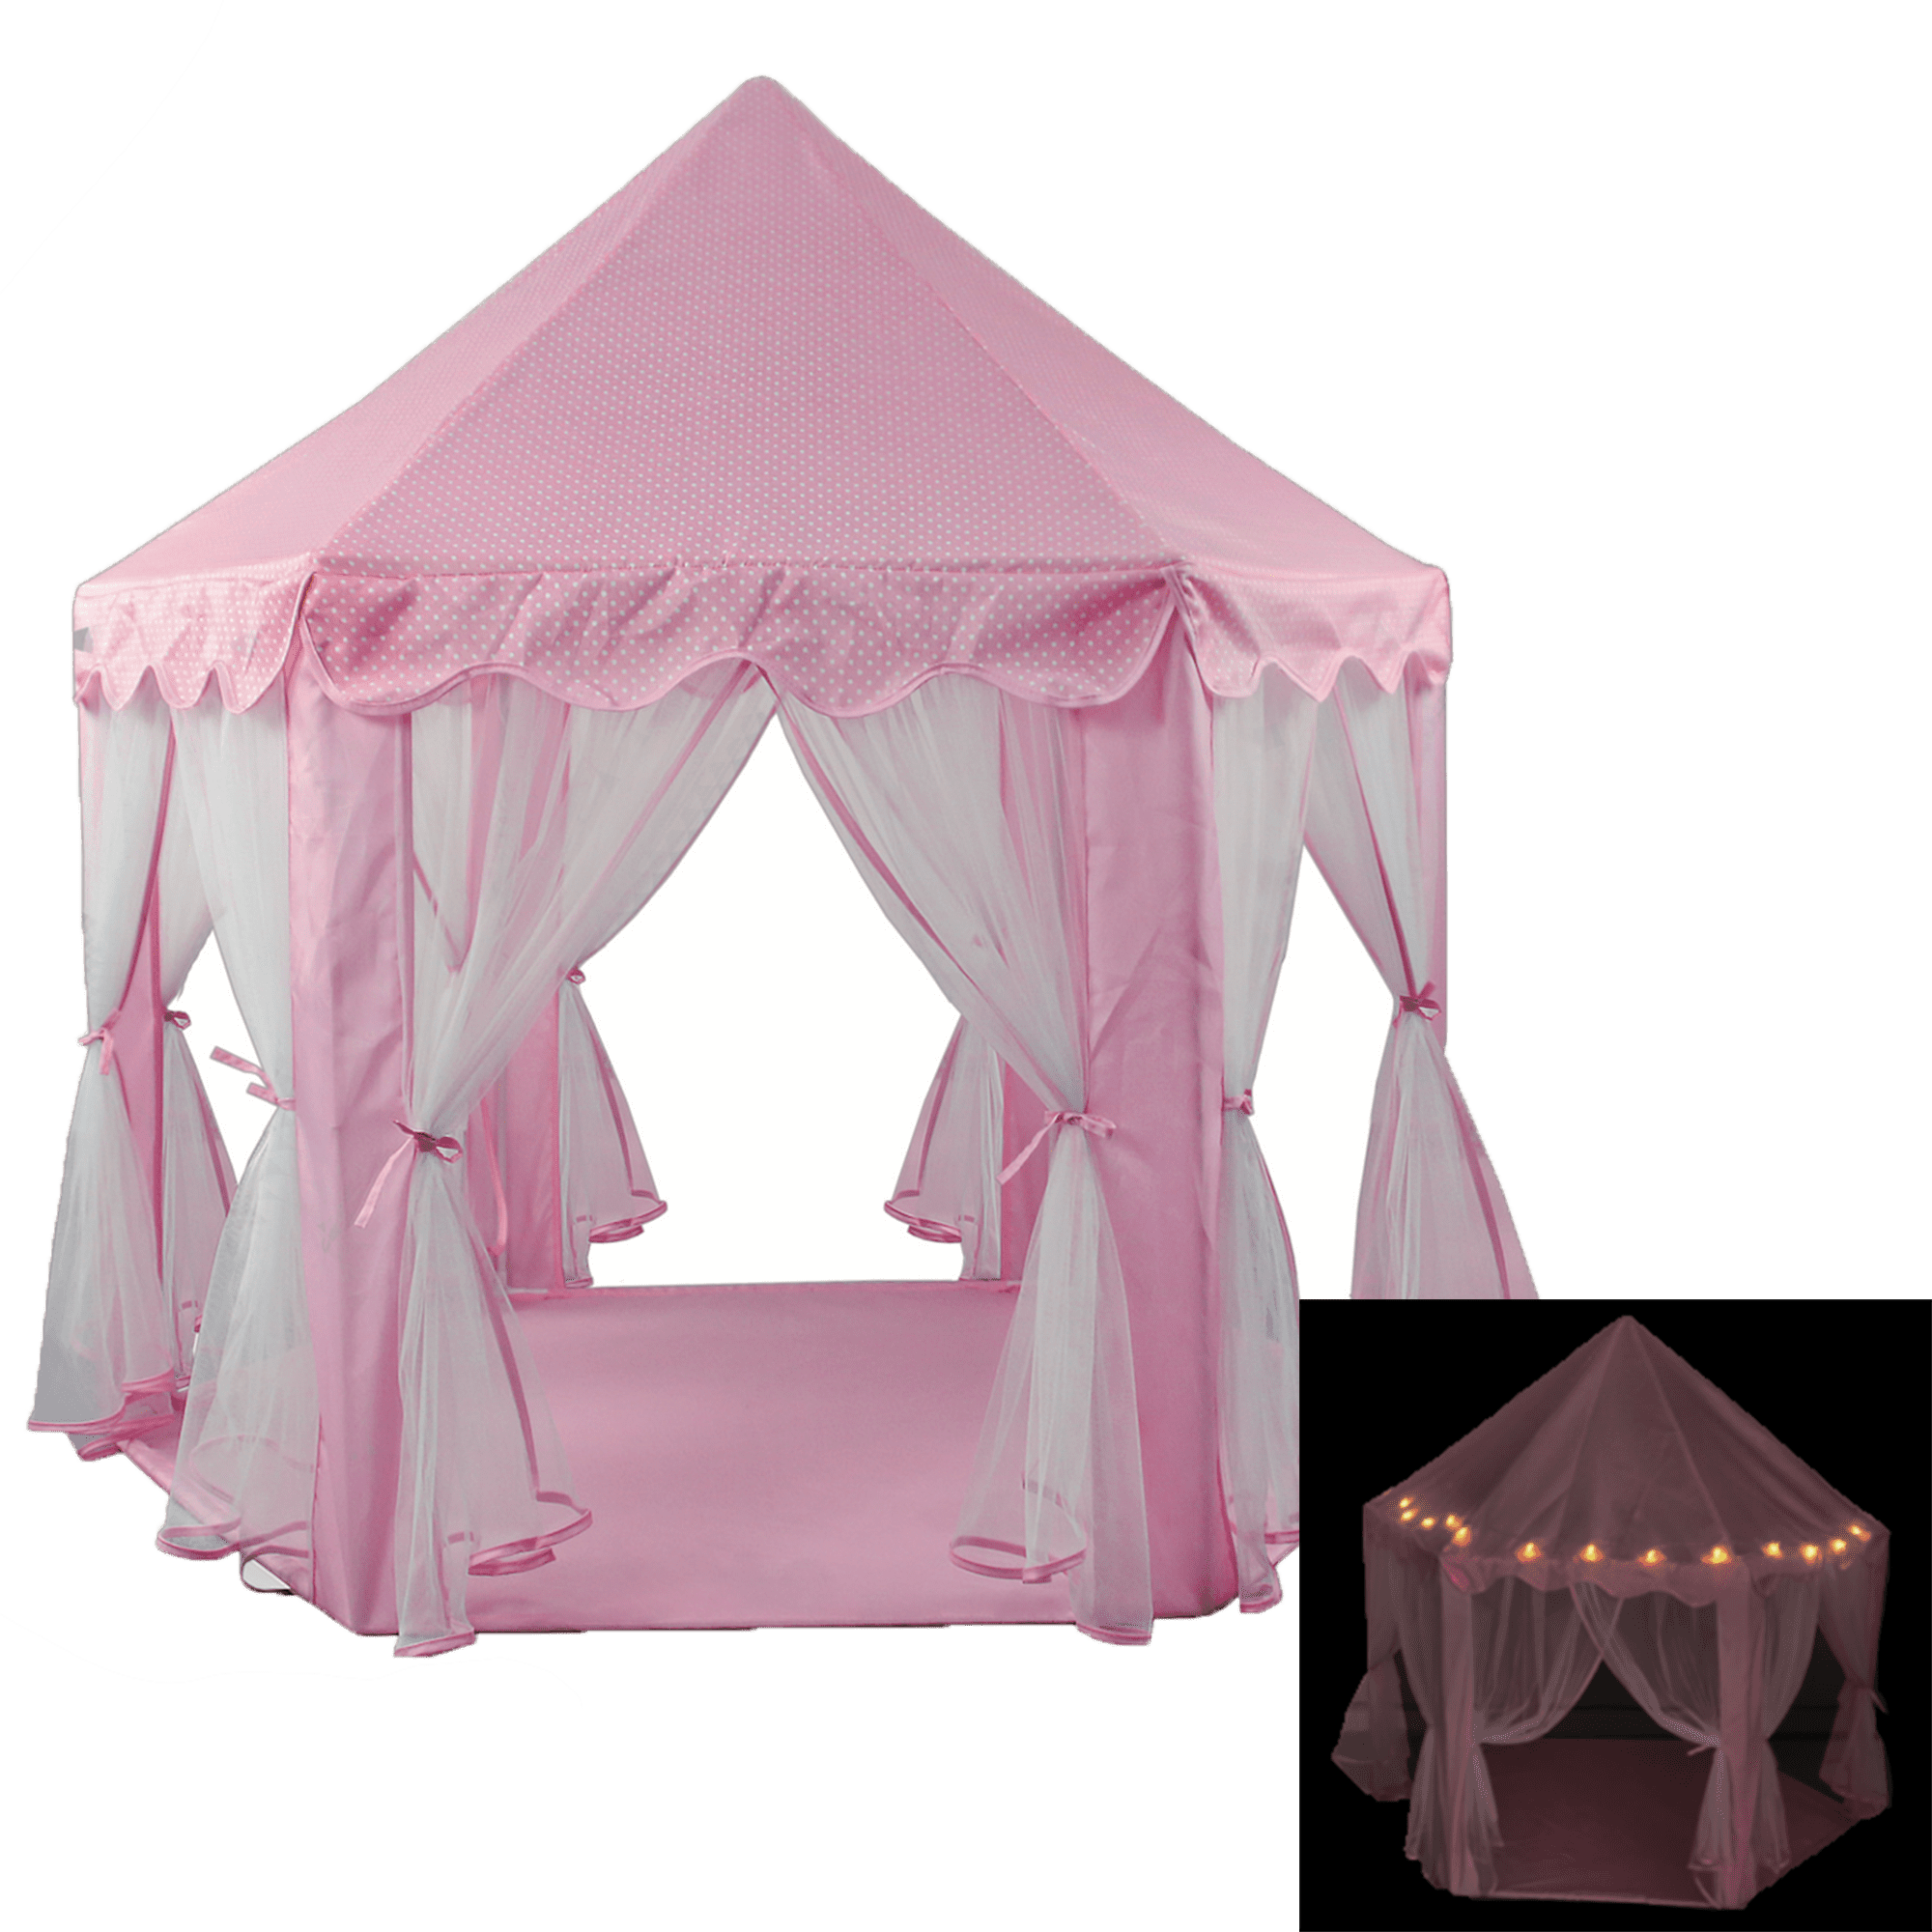 Details about    Princess Castle Play Tent Fairy Kids Play Princess tent with little lights 